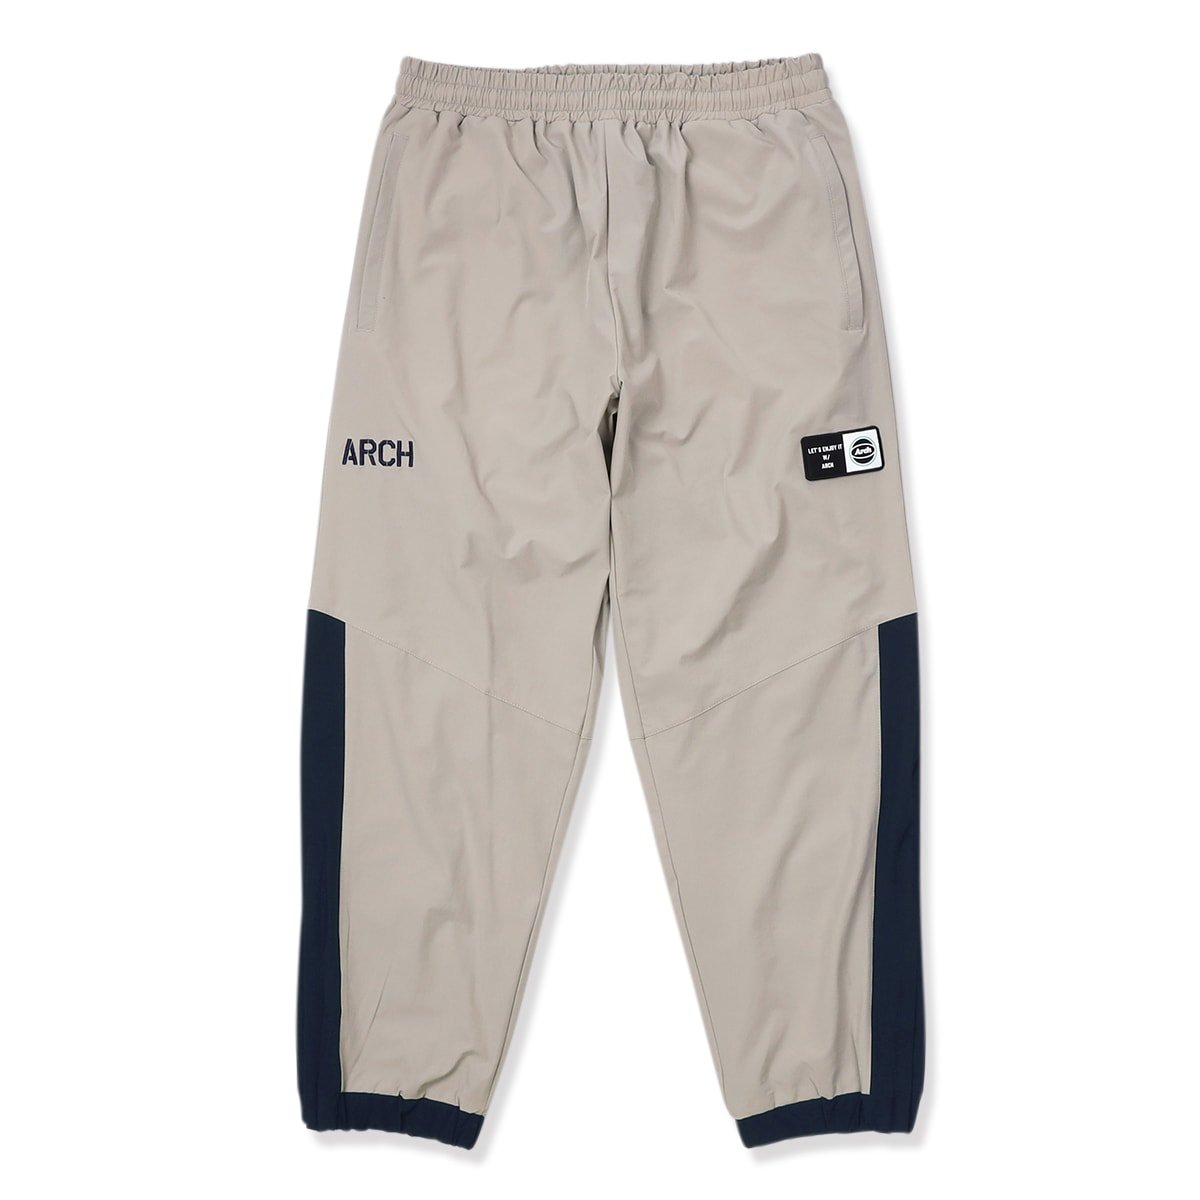 classic track pants【stone blue】 - Arch ☆ アーチ